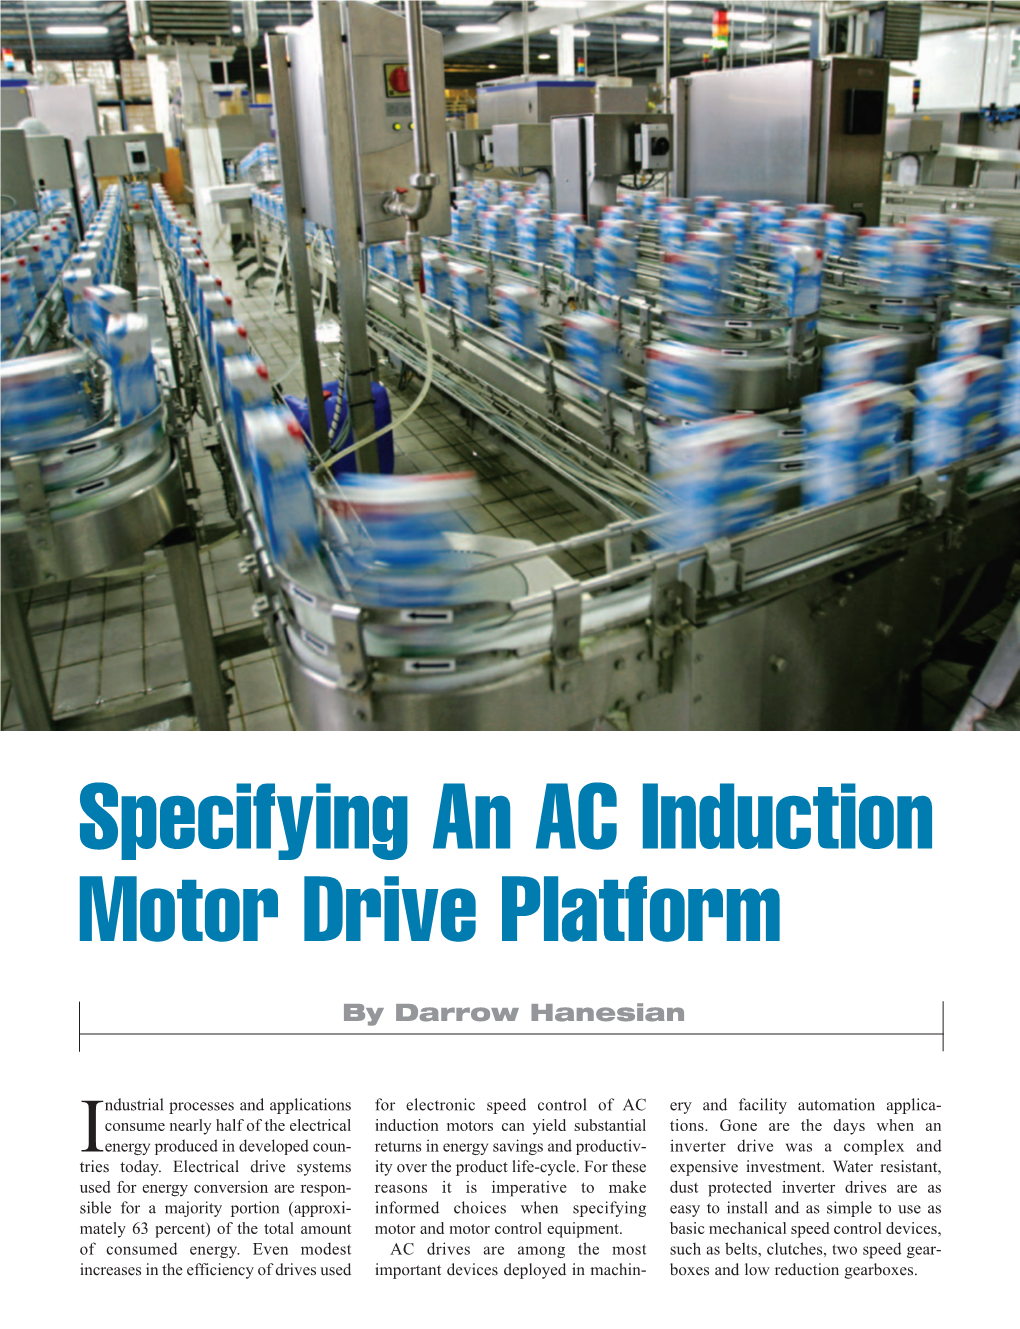 Specifying an AC Induction Motor Drive Platform